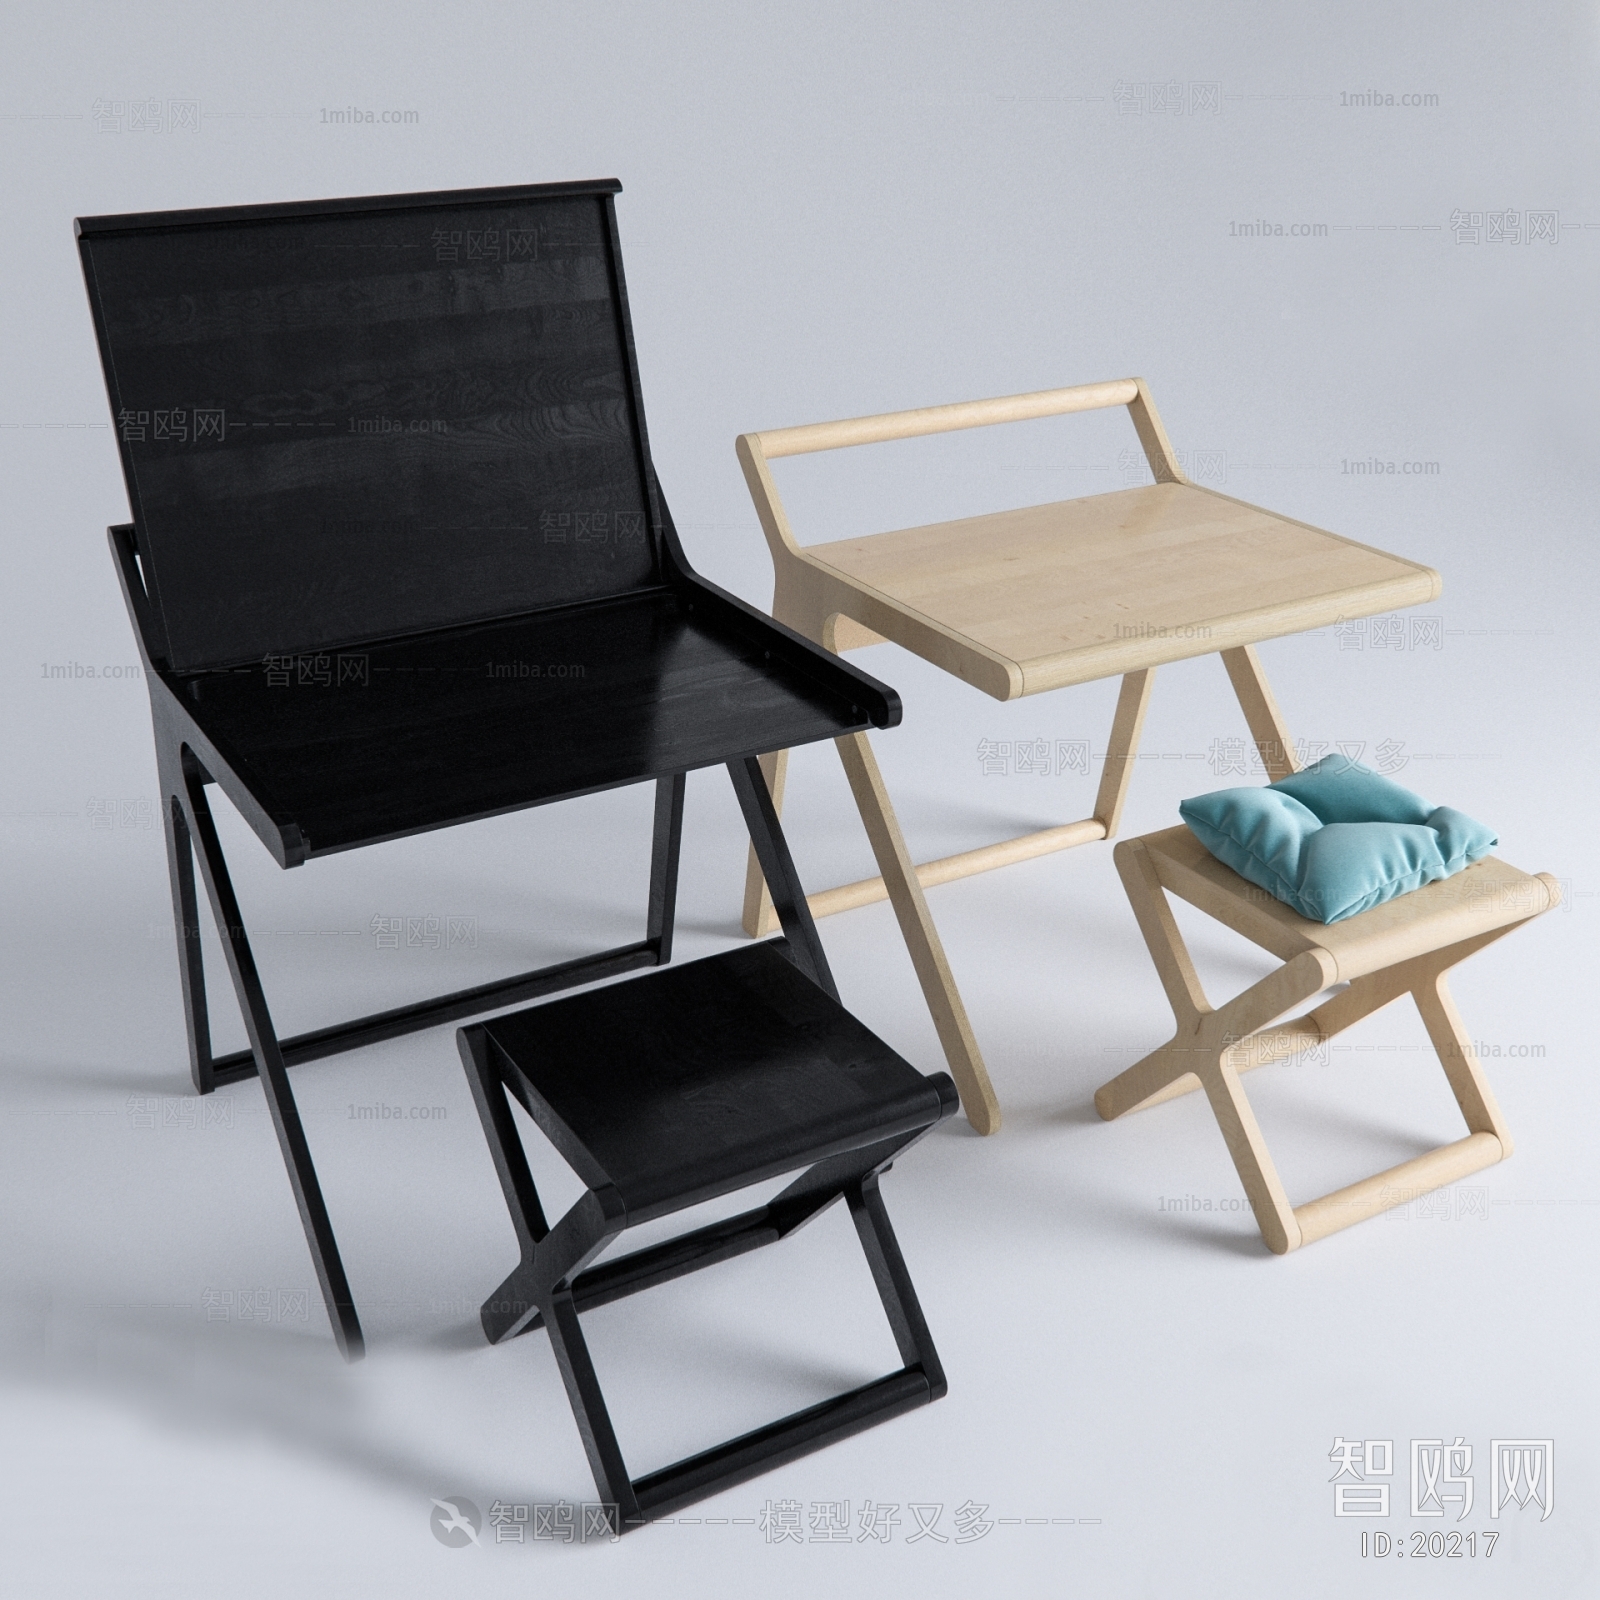 Modern Nordic Style Children's Table/chair